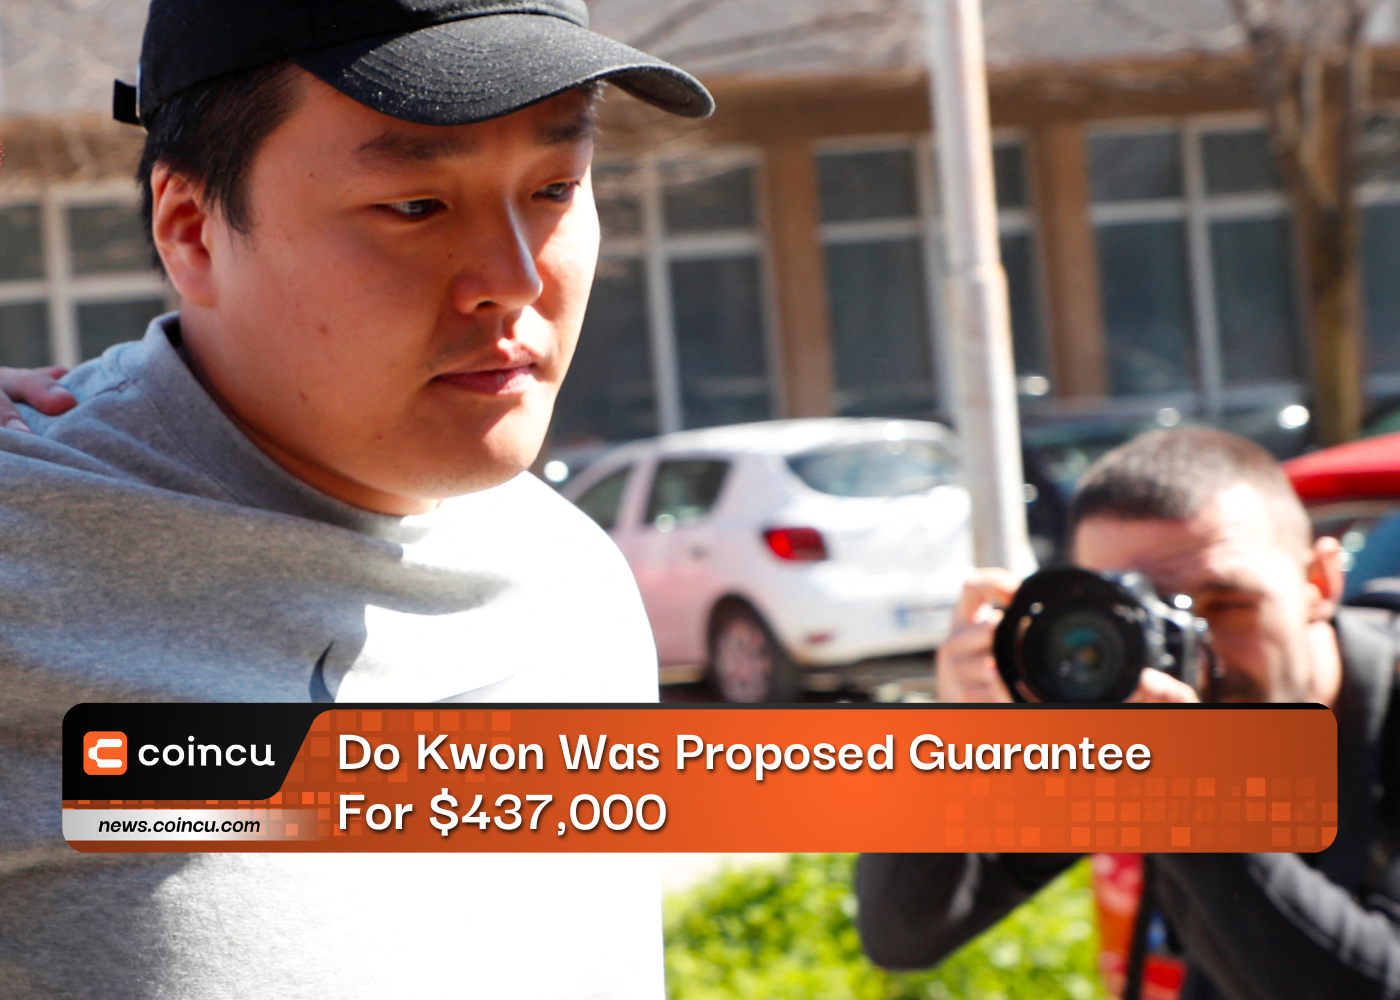 Do Kwon Was Proposed A Guarantee For $437,000